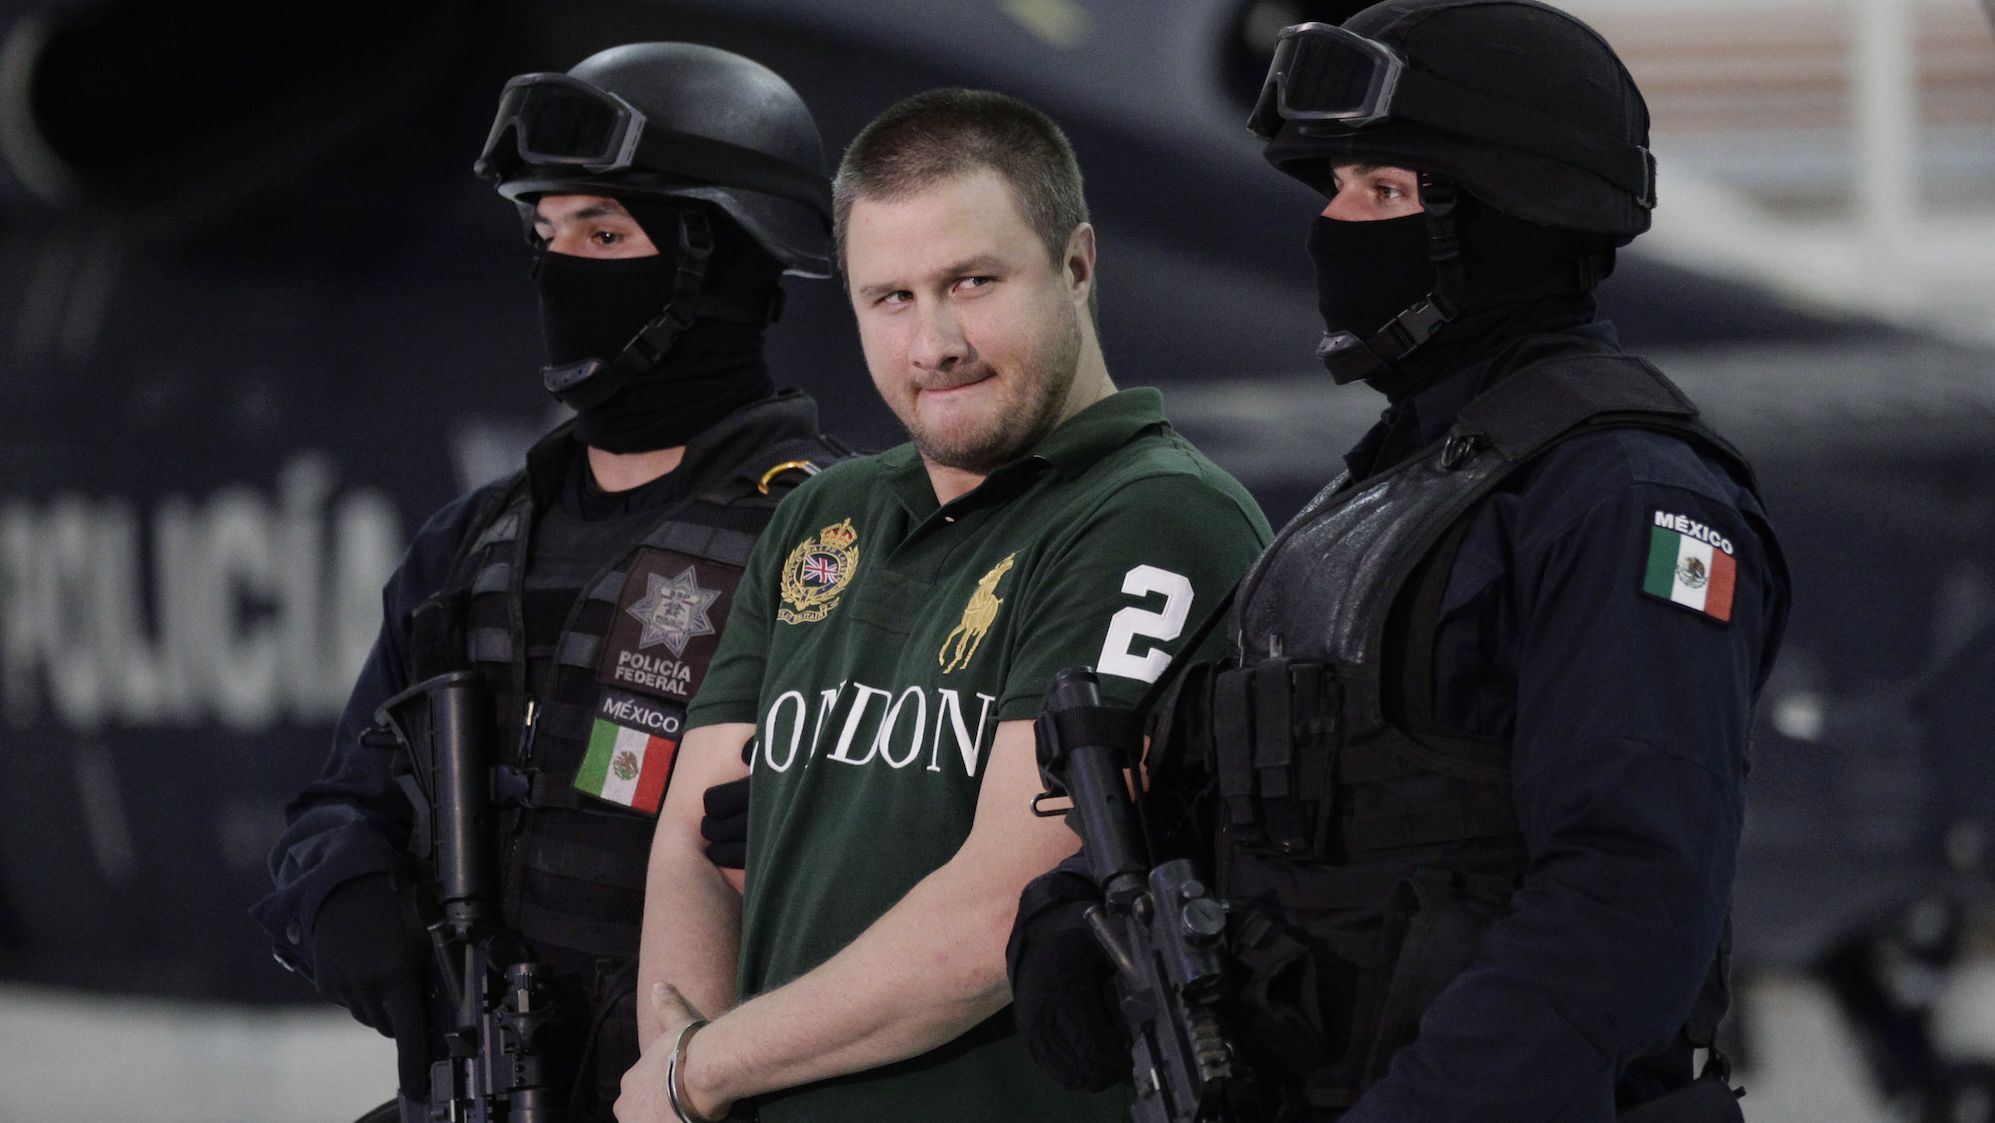 Edgar "La Barbie" Valdez Villareal is escorted by Mexican federal police during a news conference at the federal police center in Mexico City in August 2010.